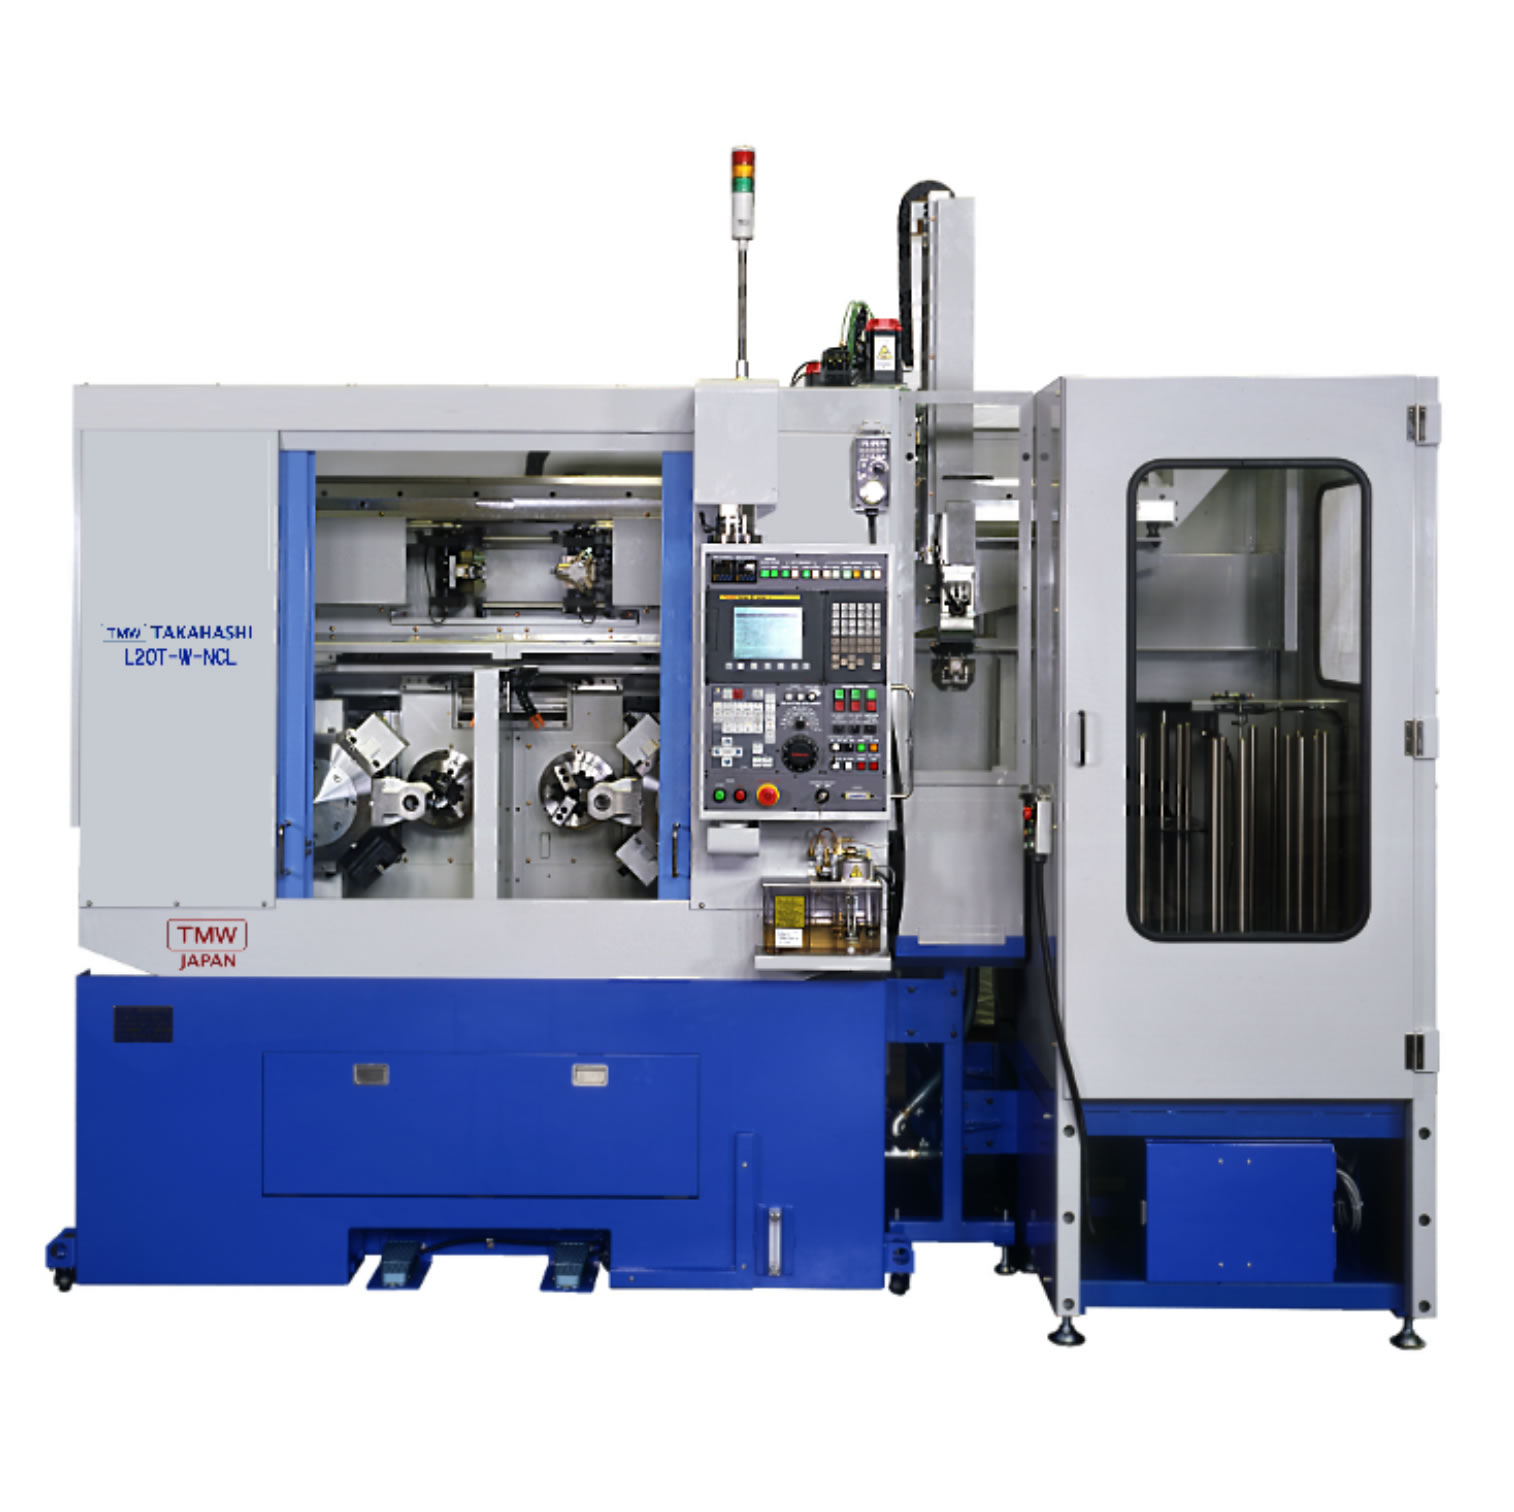 Microstar l20t-w-ncl (parallel twin spindle twin turret precision cnc lathe with 3-axis gantry loader)